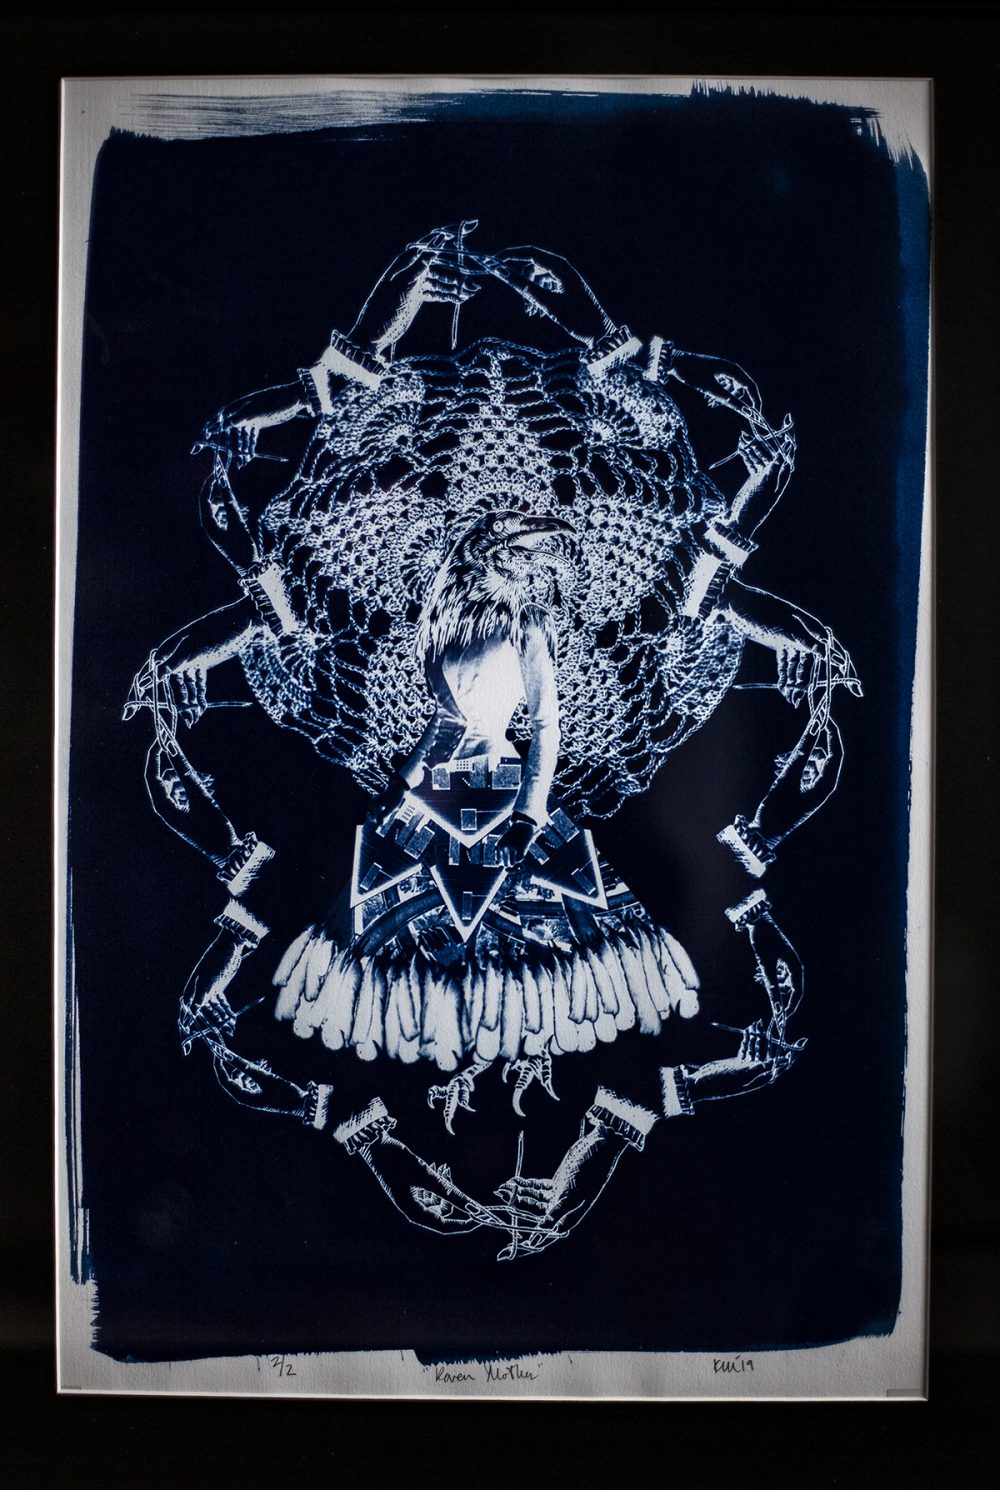 A cyanotype print in a black frame. A central female figure with a birds head, wears a skirt of feathers, and has bird claws for feet. A lace doilly is behind her, like a halo. Surrounding the iconic form is an undulating border or hands with knitting needles. The image is printed in tones of indigo and white, with a very dark blue in the background.